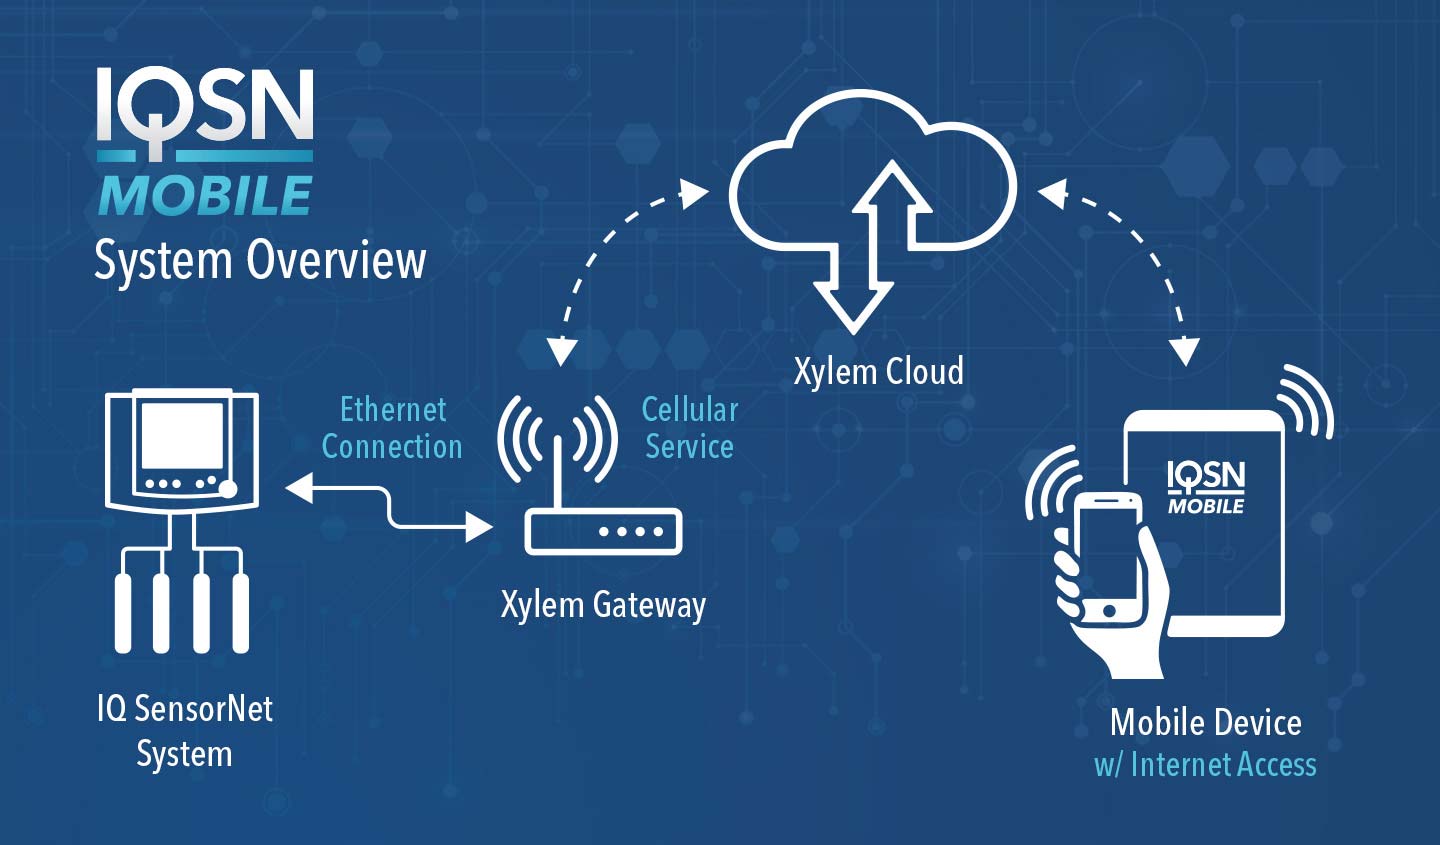 iqsn mobile system overview